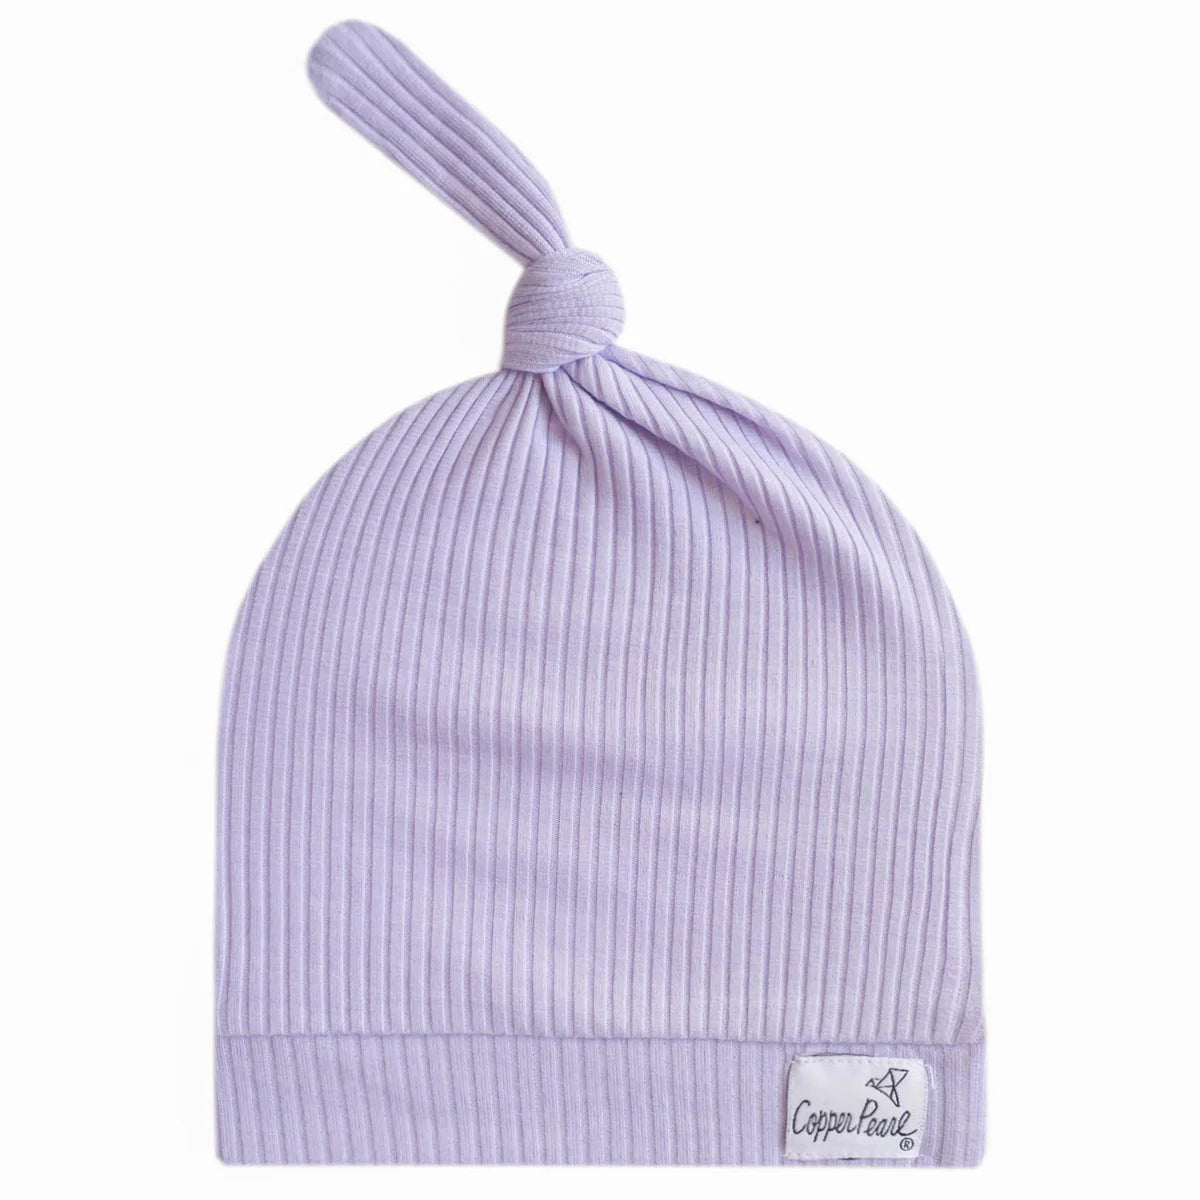 Copper Pearl - Periwinkle Rib Knit Top Knot Hat